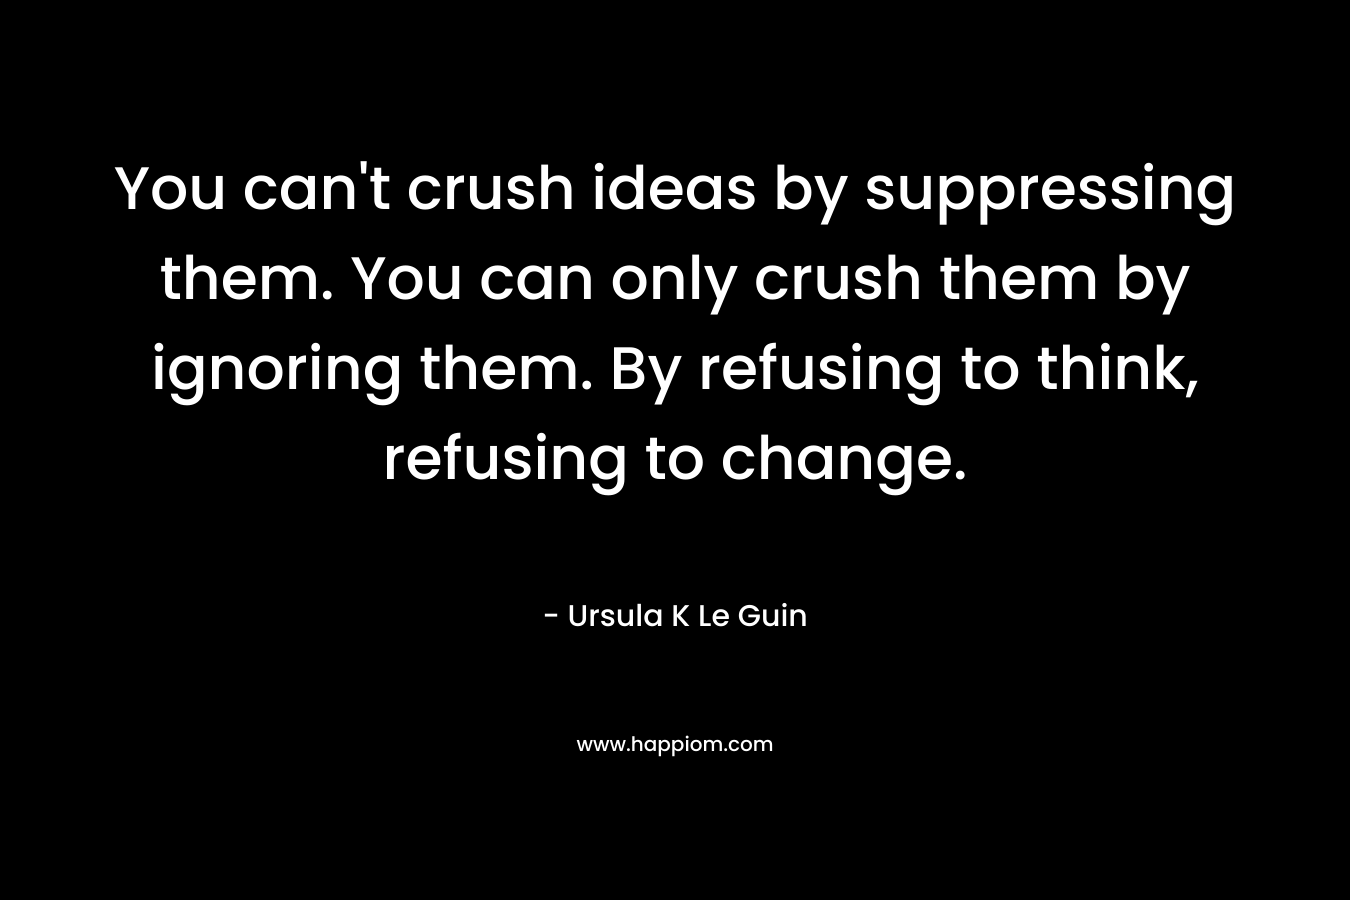 You can't crush ideas by suppressing them. You can only crush them by ignoring them. By refusing to think, refusing to change.